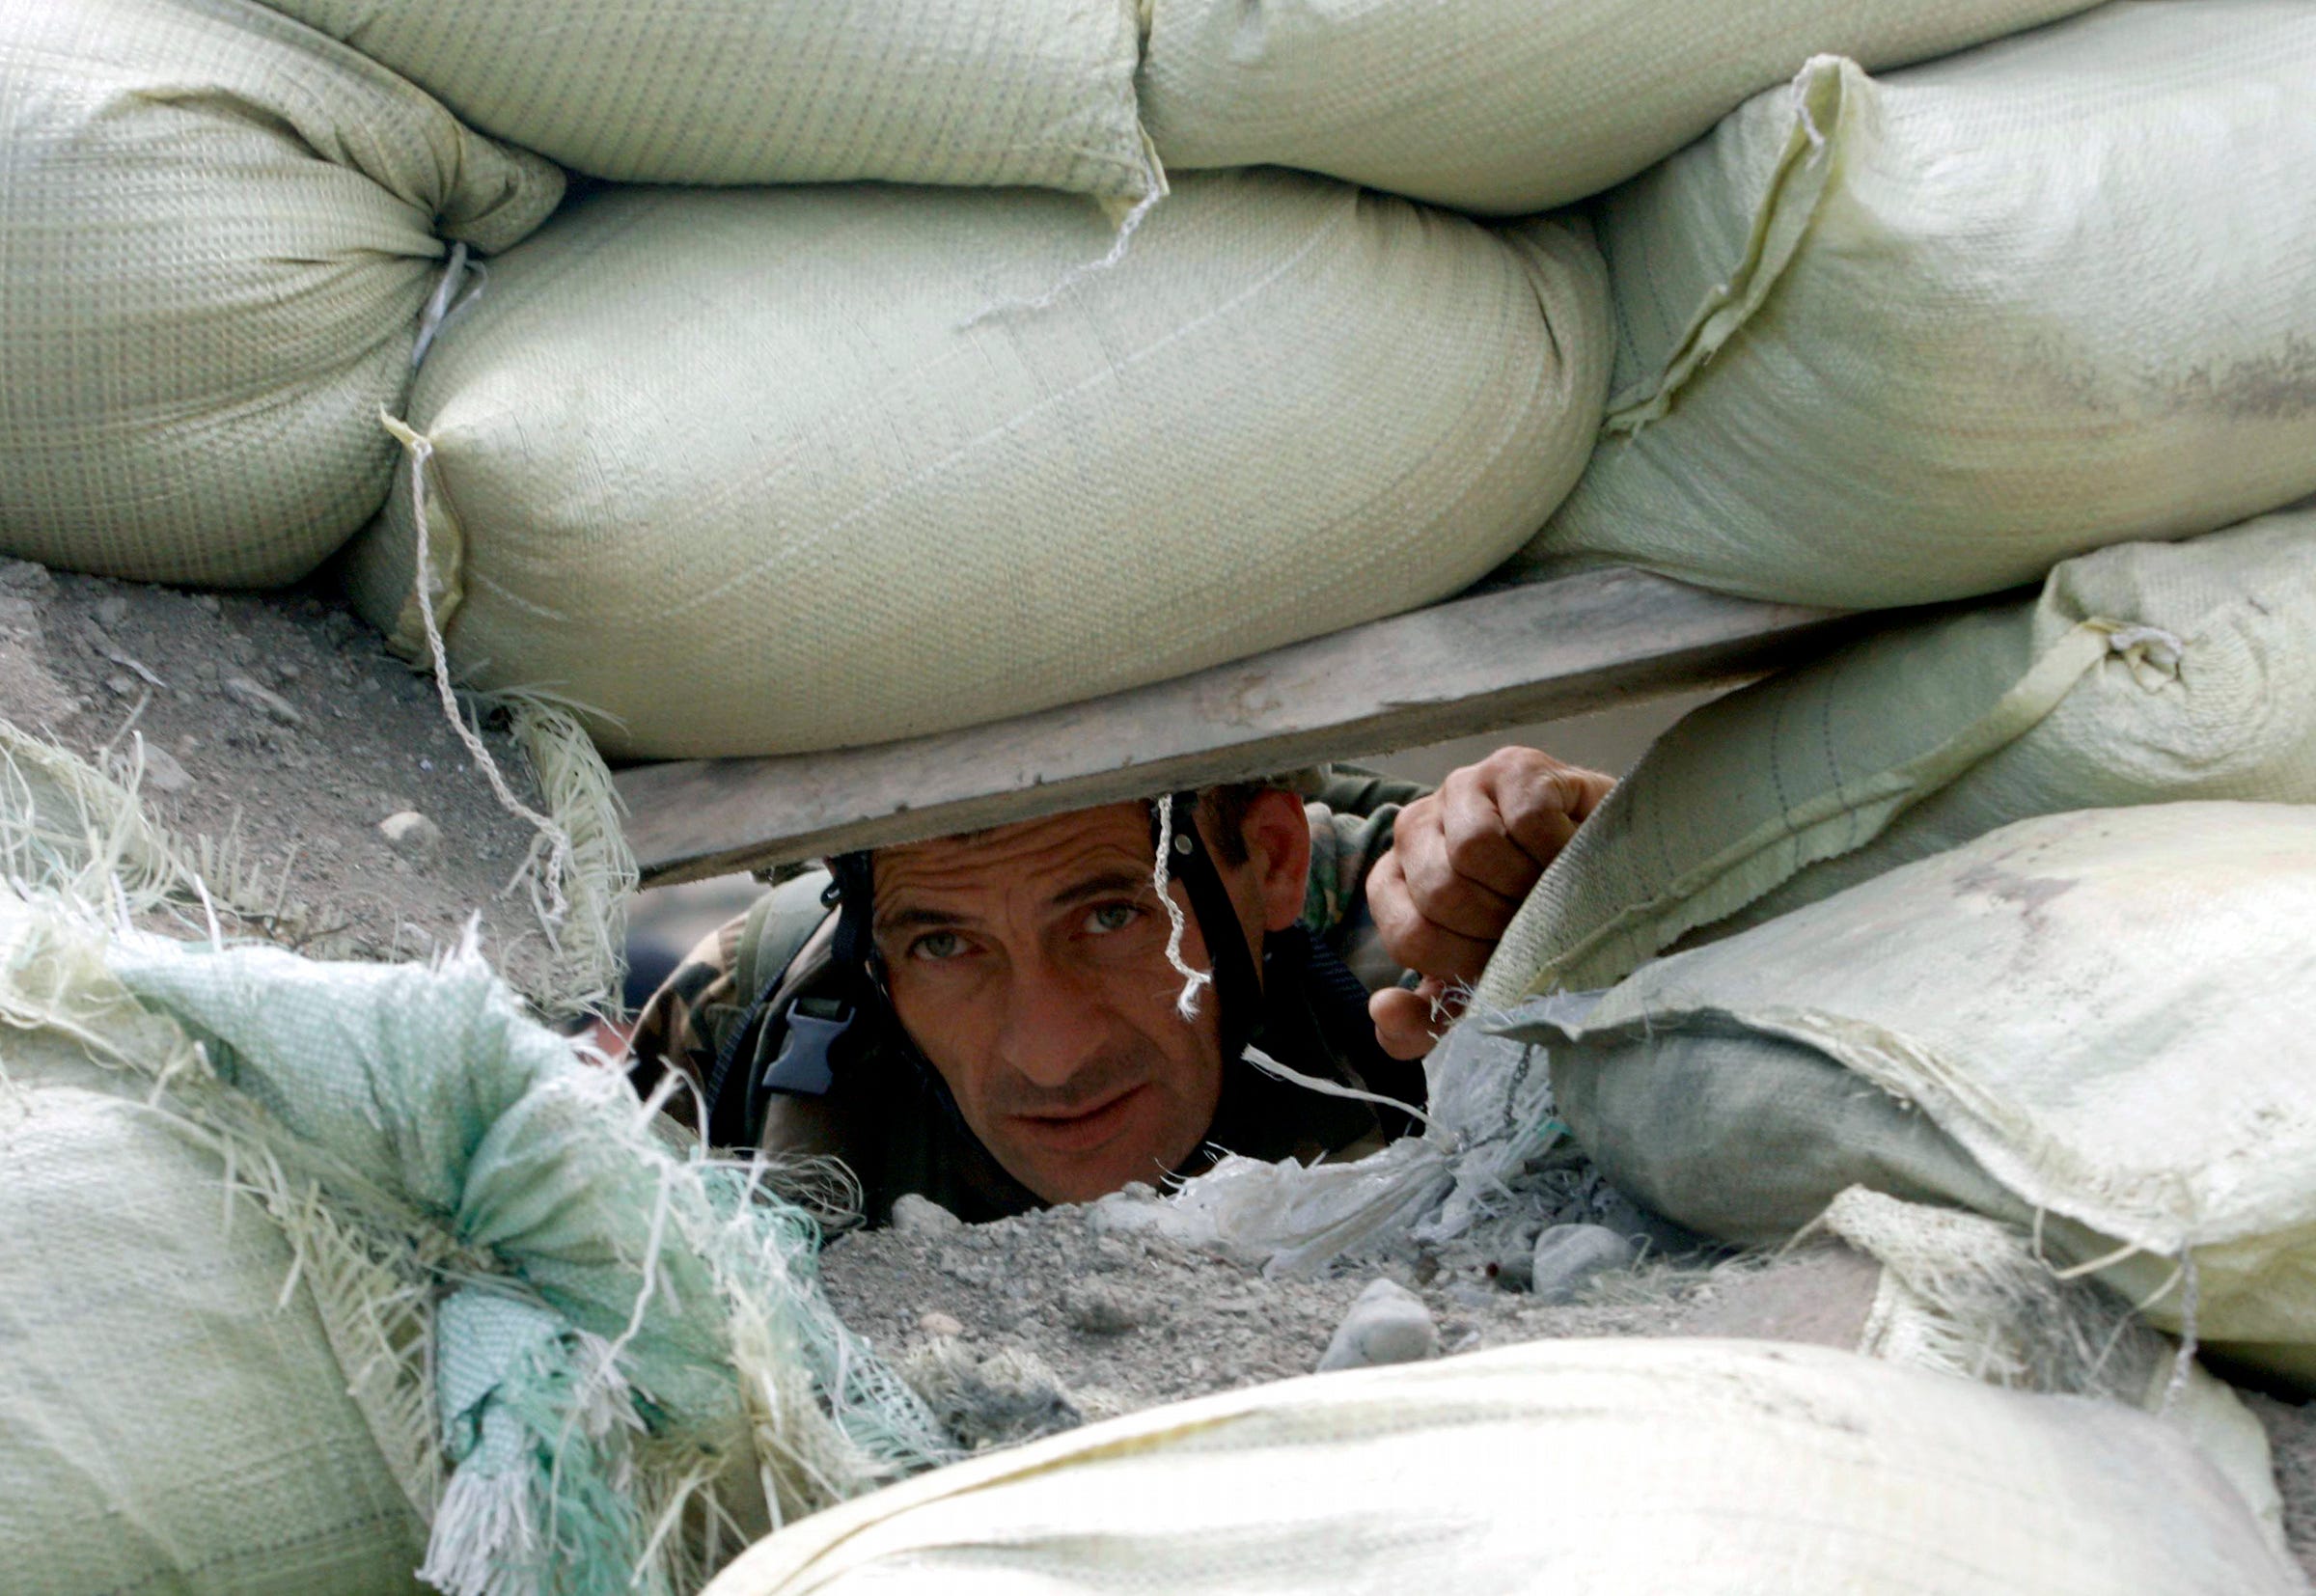 A Georgian soldier watches through a gun-port of his fortified foxhole looking toward of South Ossetian separatist government forces' positions in the ethnic Georgian village of Ergneti, on Tuesday, Aug. 5, 2008. Six people died in fighting that broke out late Friday and early Saturday, including sniper and mortar fire between South Ossetian and Georgian forces. The breakaway republic of South Ossetia split from Georgia in the early 1990s after brief but violent conflict.       (AP Photo/George Abdaladze) ORG XMIT: MOSB138